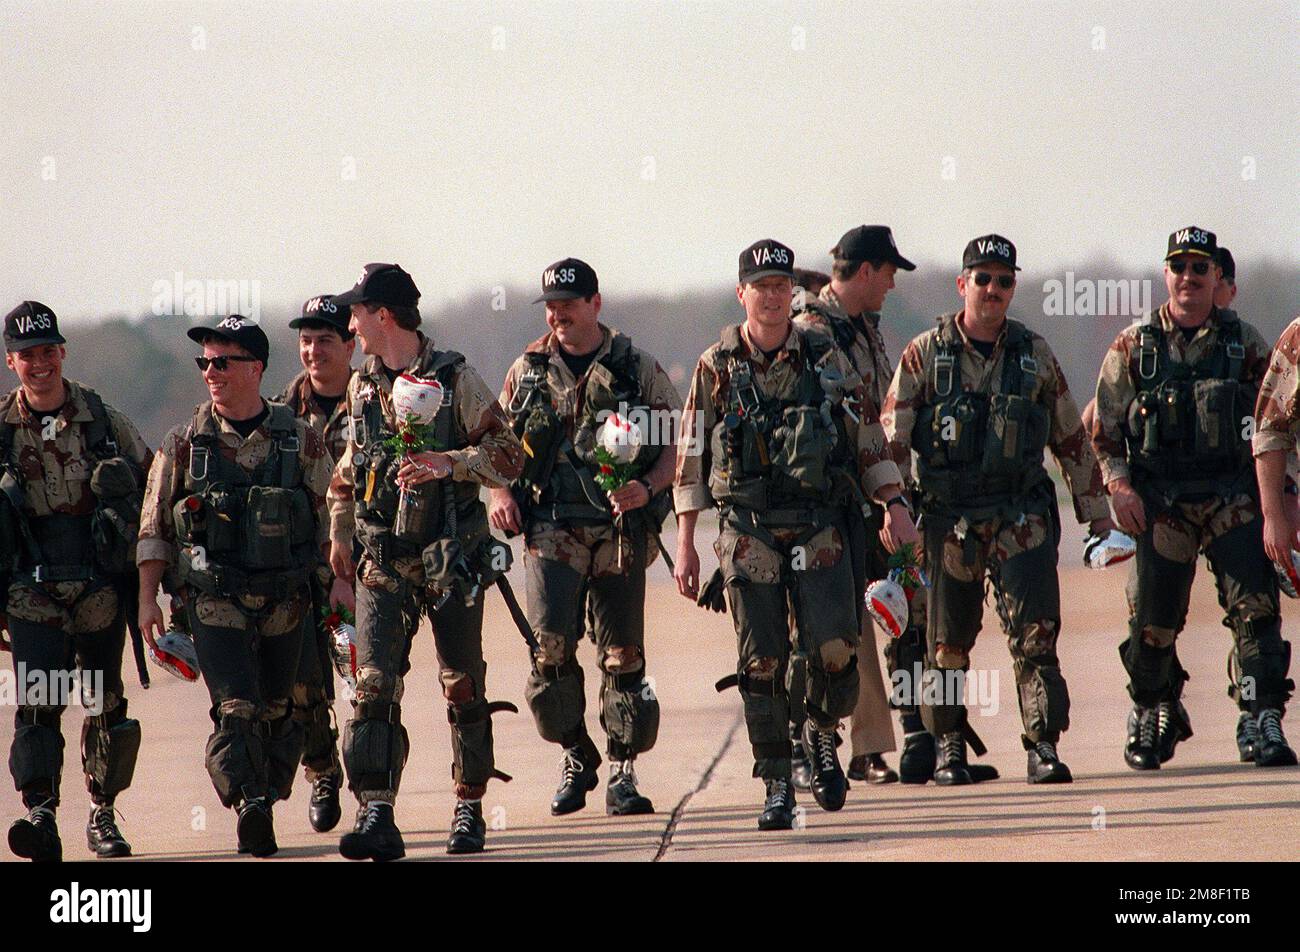 The pilots and bombardier-navigators of Attack Squadron 35 (VA-35) walk together across the flight line toward the crowd gathered to meet them. VF-35 has returned to Oceana following its deployment to the Red Sea aboard the aircraft carrier USS SARATOGA (CV-60) for Operation Desert Shield and Operation Desert Storm. Subject Operation/Series: DESERT STORMDESERT SHIELD Base: Naval Air Station, Oceana State: Virginia (VA) Country: United States Of America (USA) Stock Photo